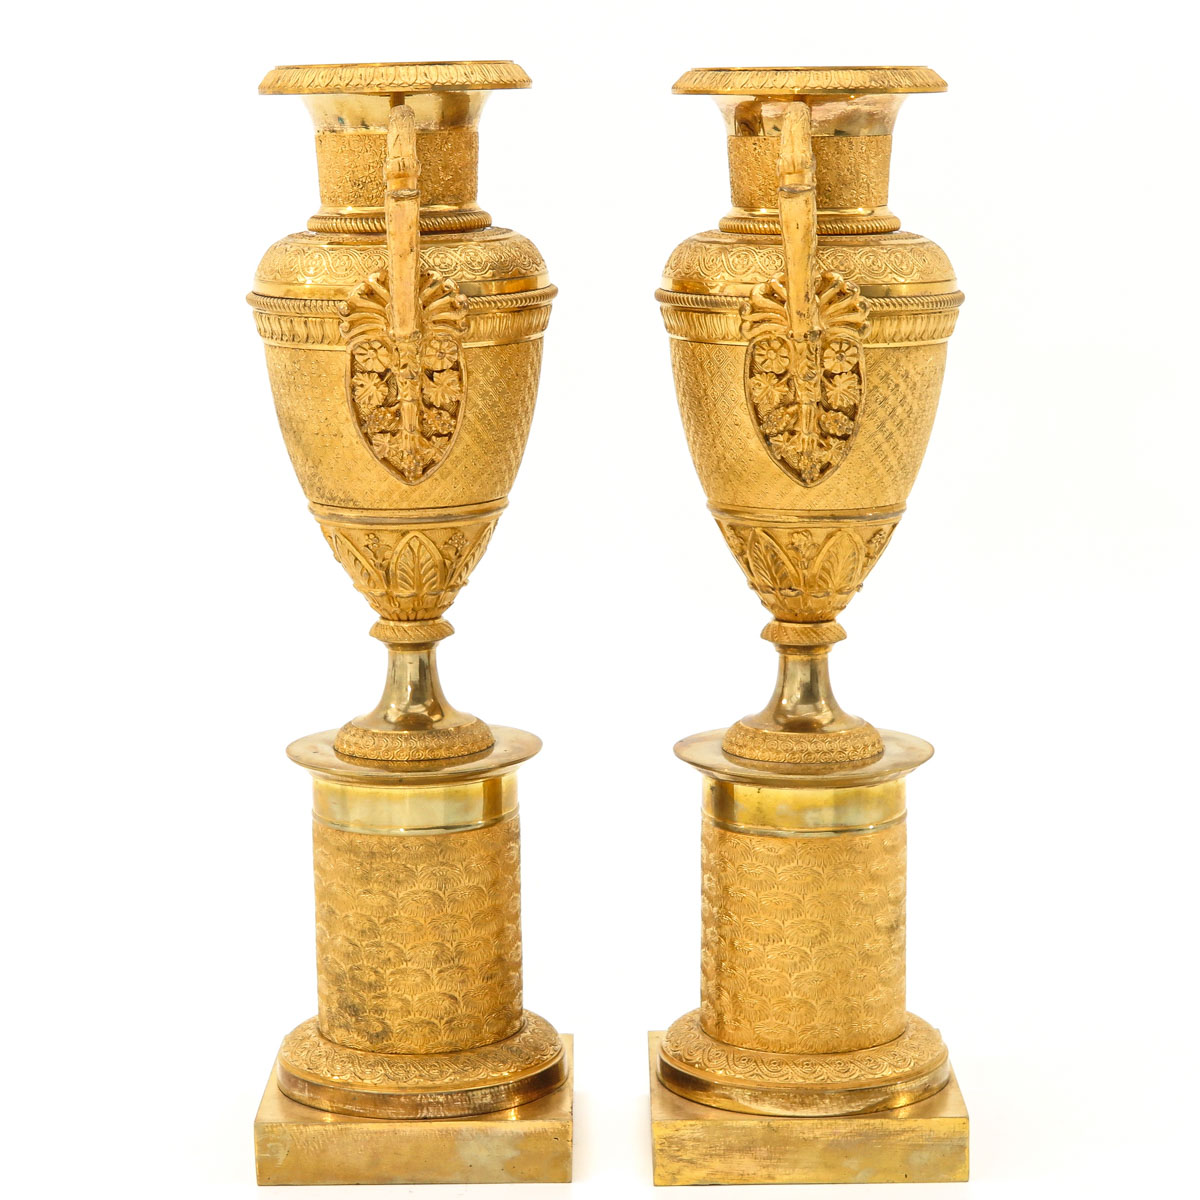 A Pair of Empire Period Vases - Image 4 of 10